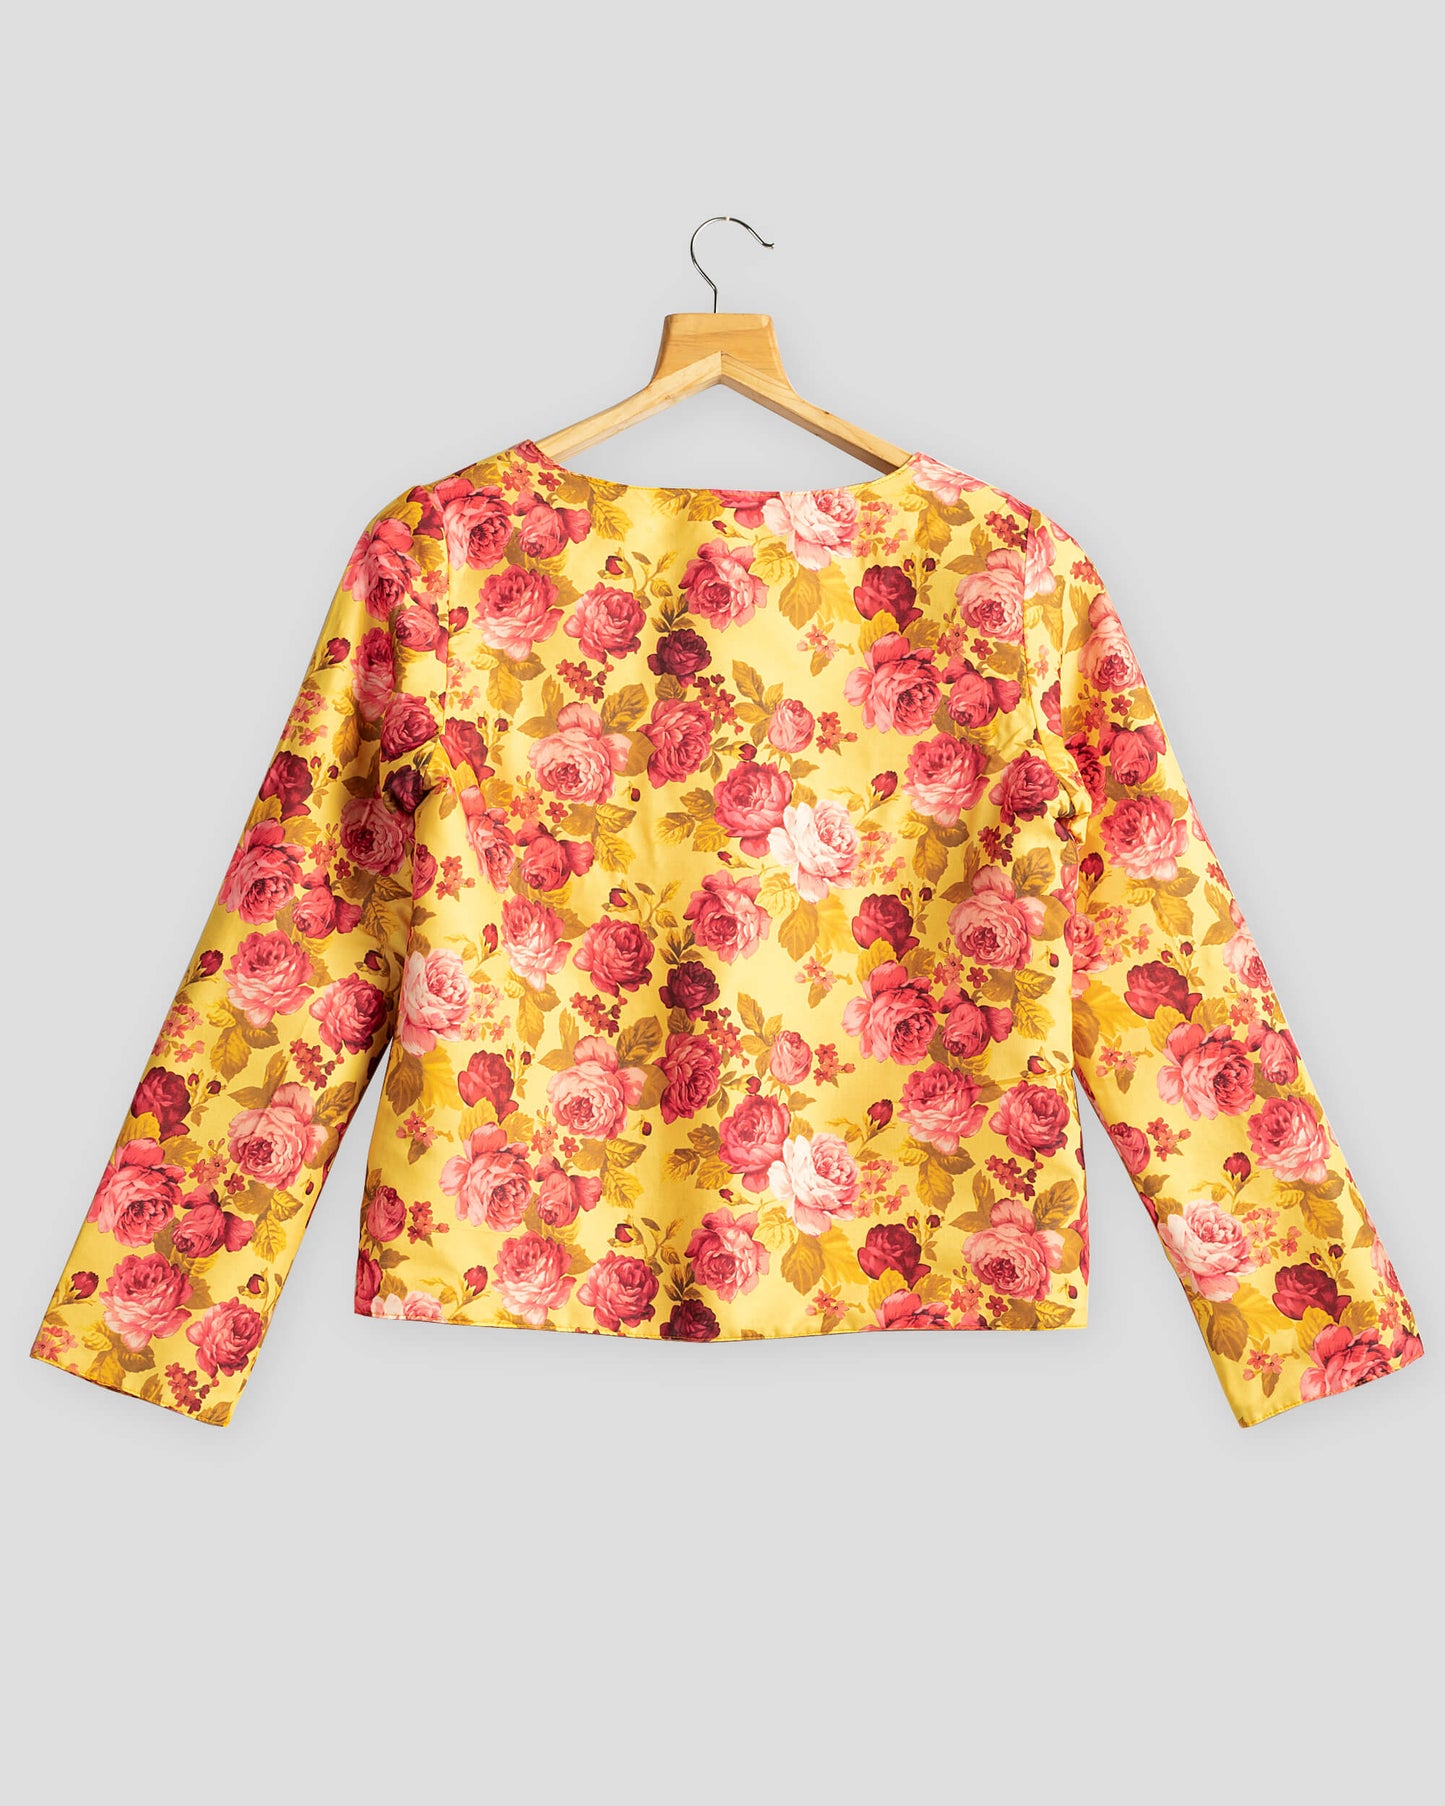 Remarkable Canary Floral Reversible Jacket